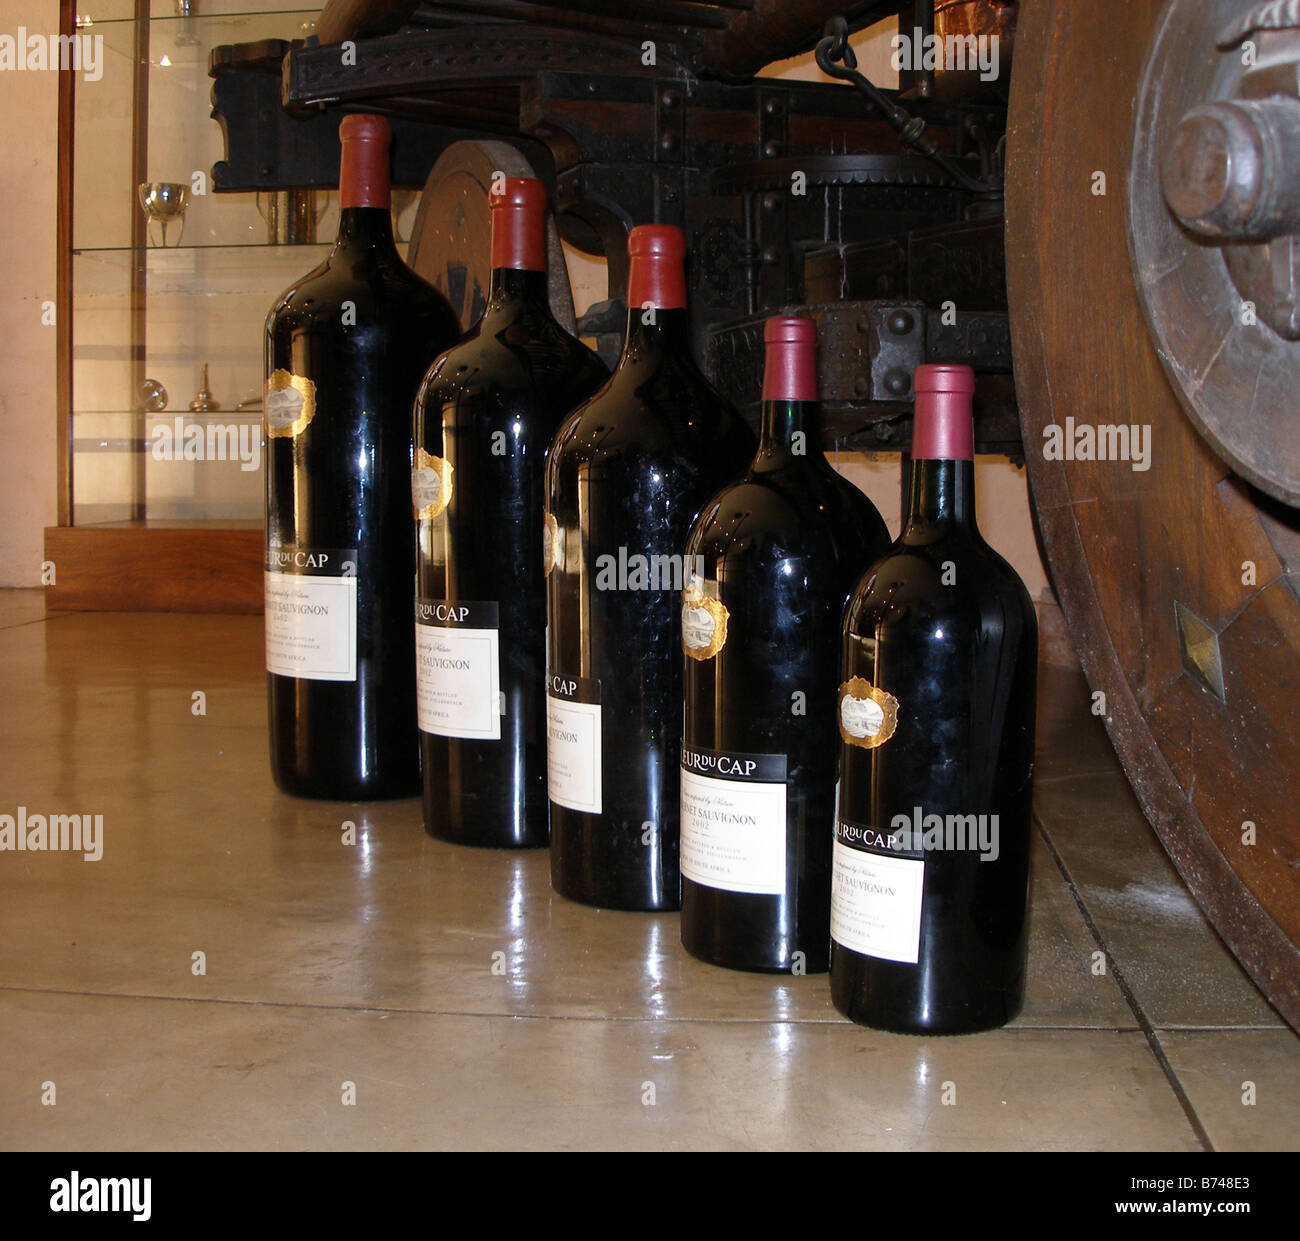 Magnum, Balthazar, Salmanazar, Methuselah and Jeroboam bottles of red wine at a South African wine farm Stock Photo